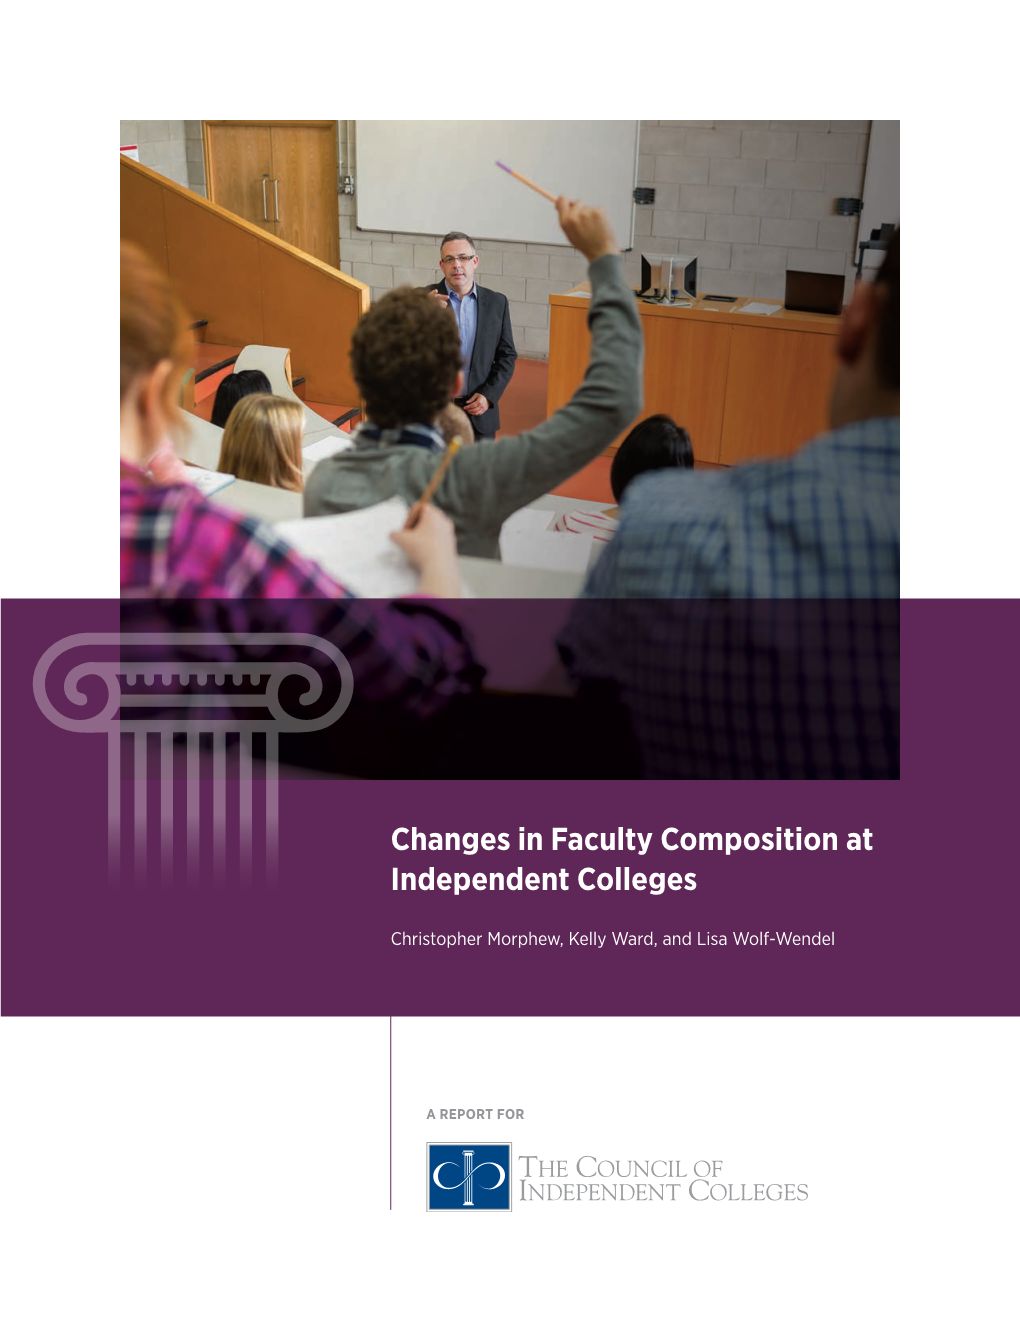 Changes in Faculty Composition at Independent Colleges